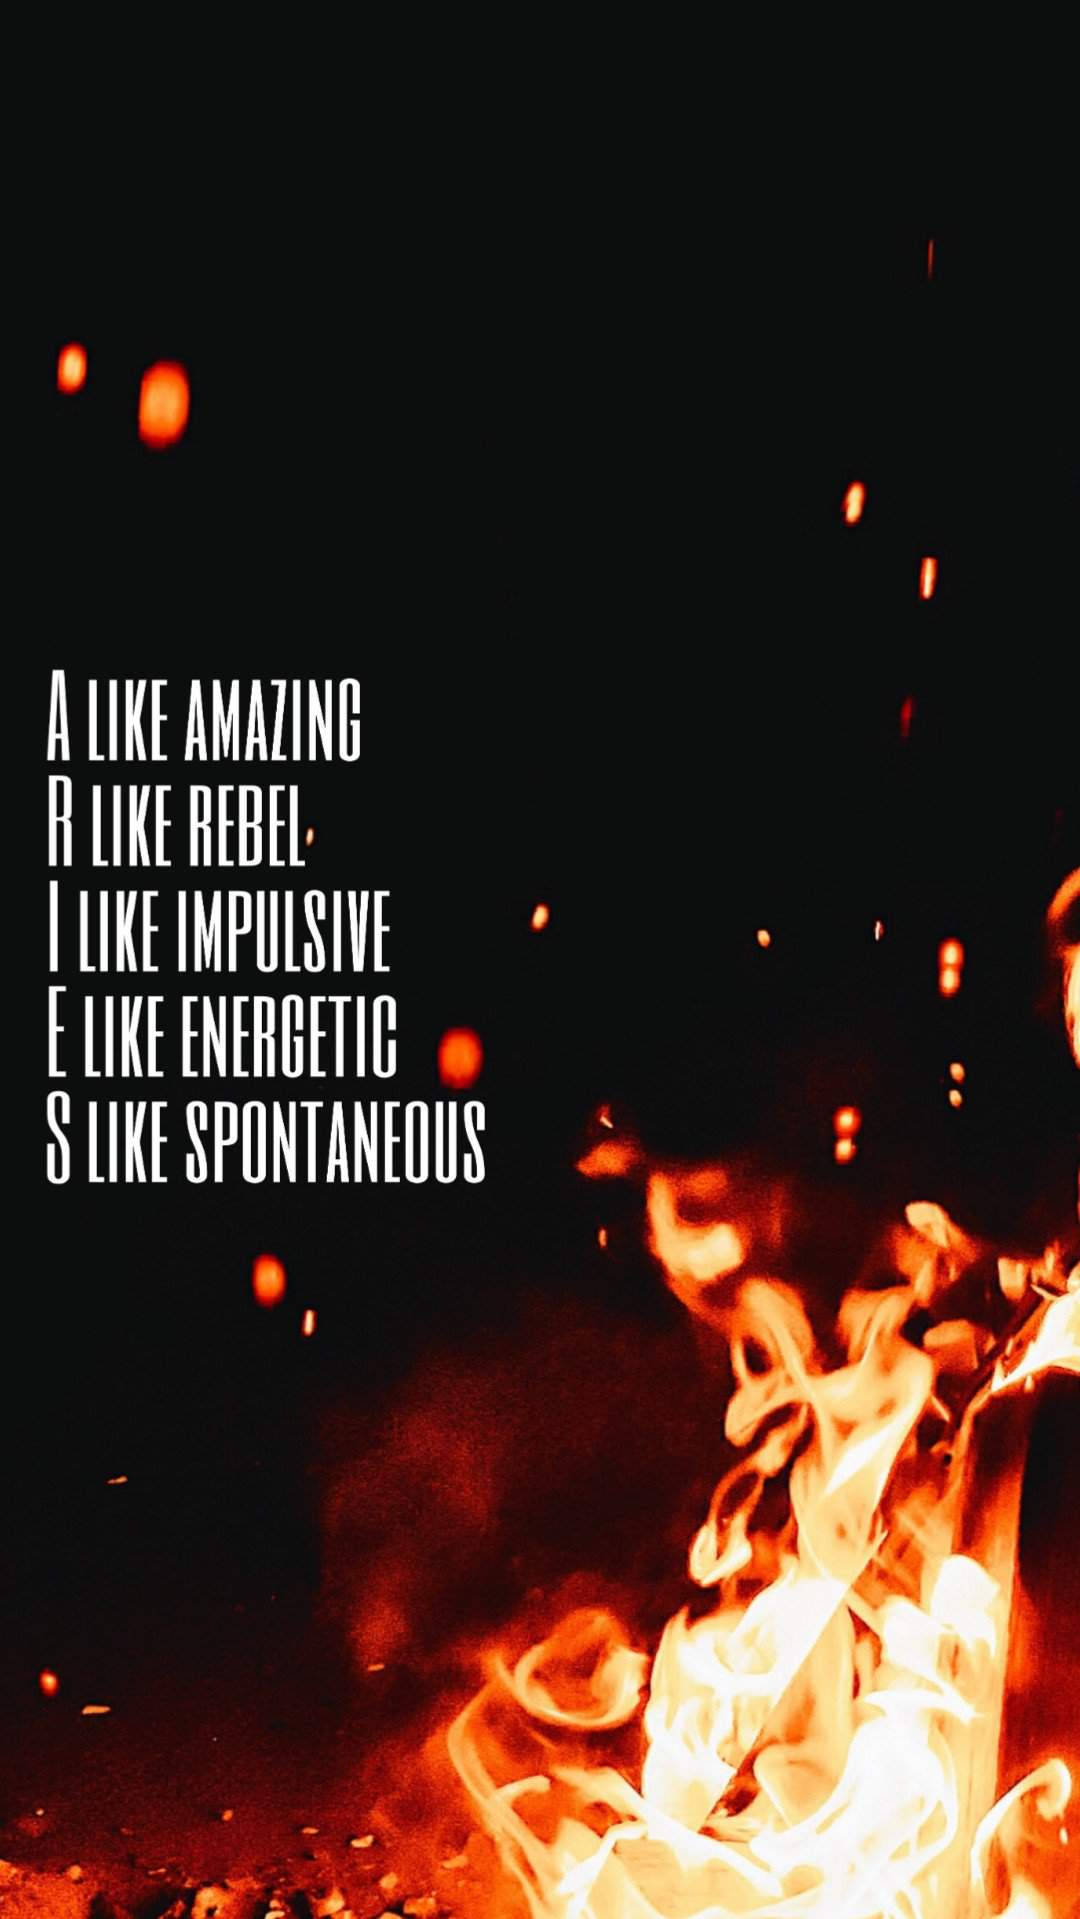 Aries Aesthetic Meaning With Fire